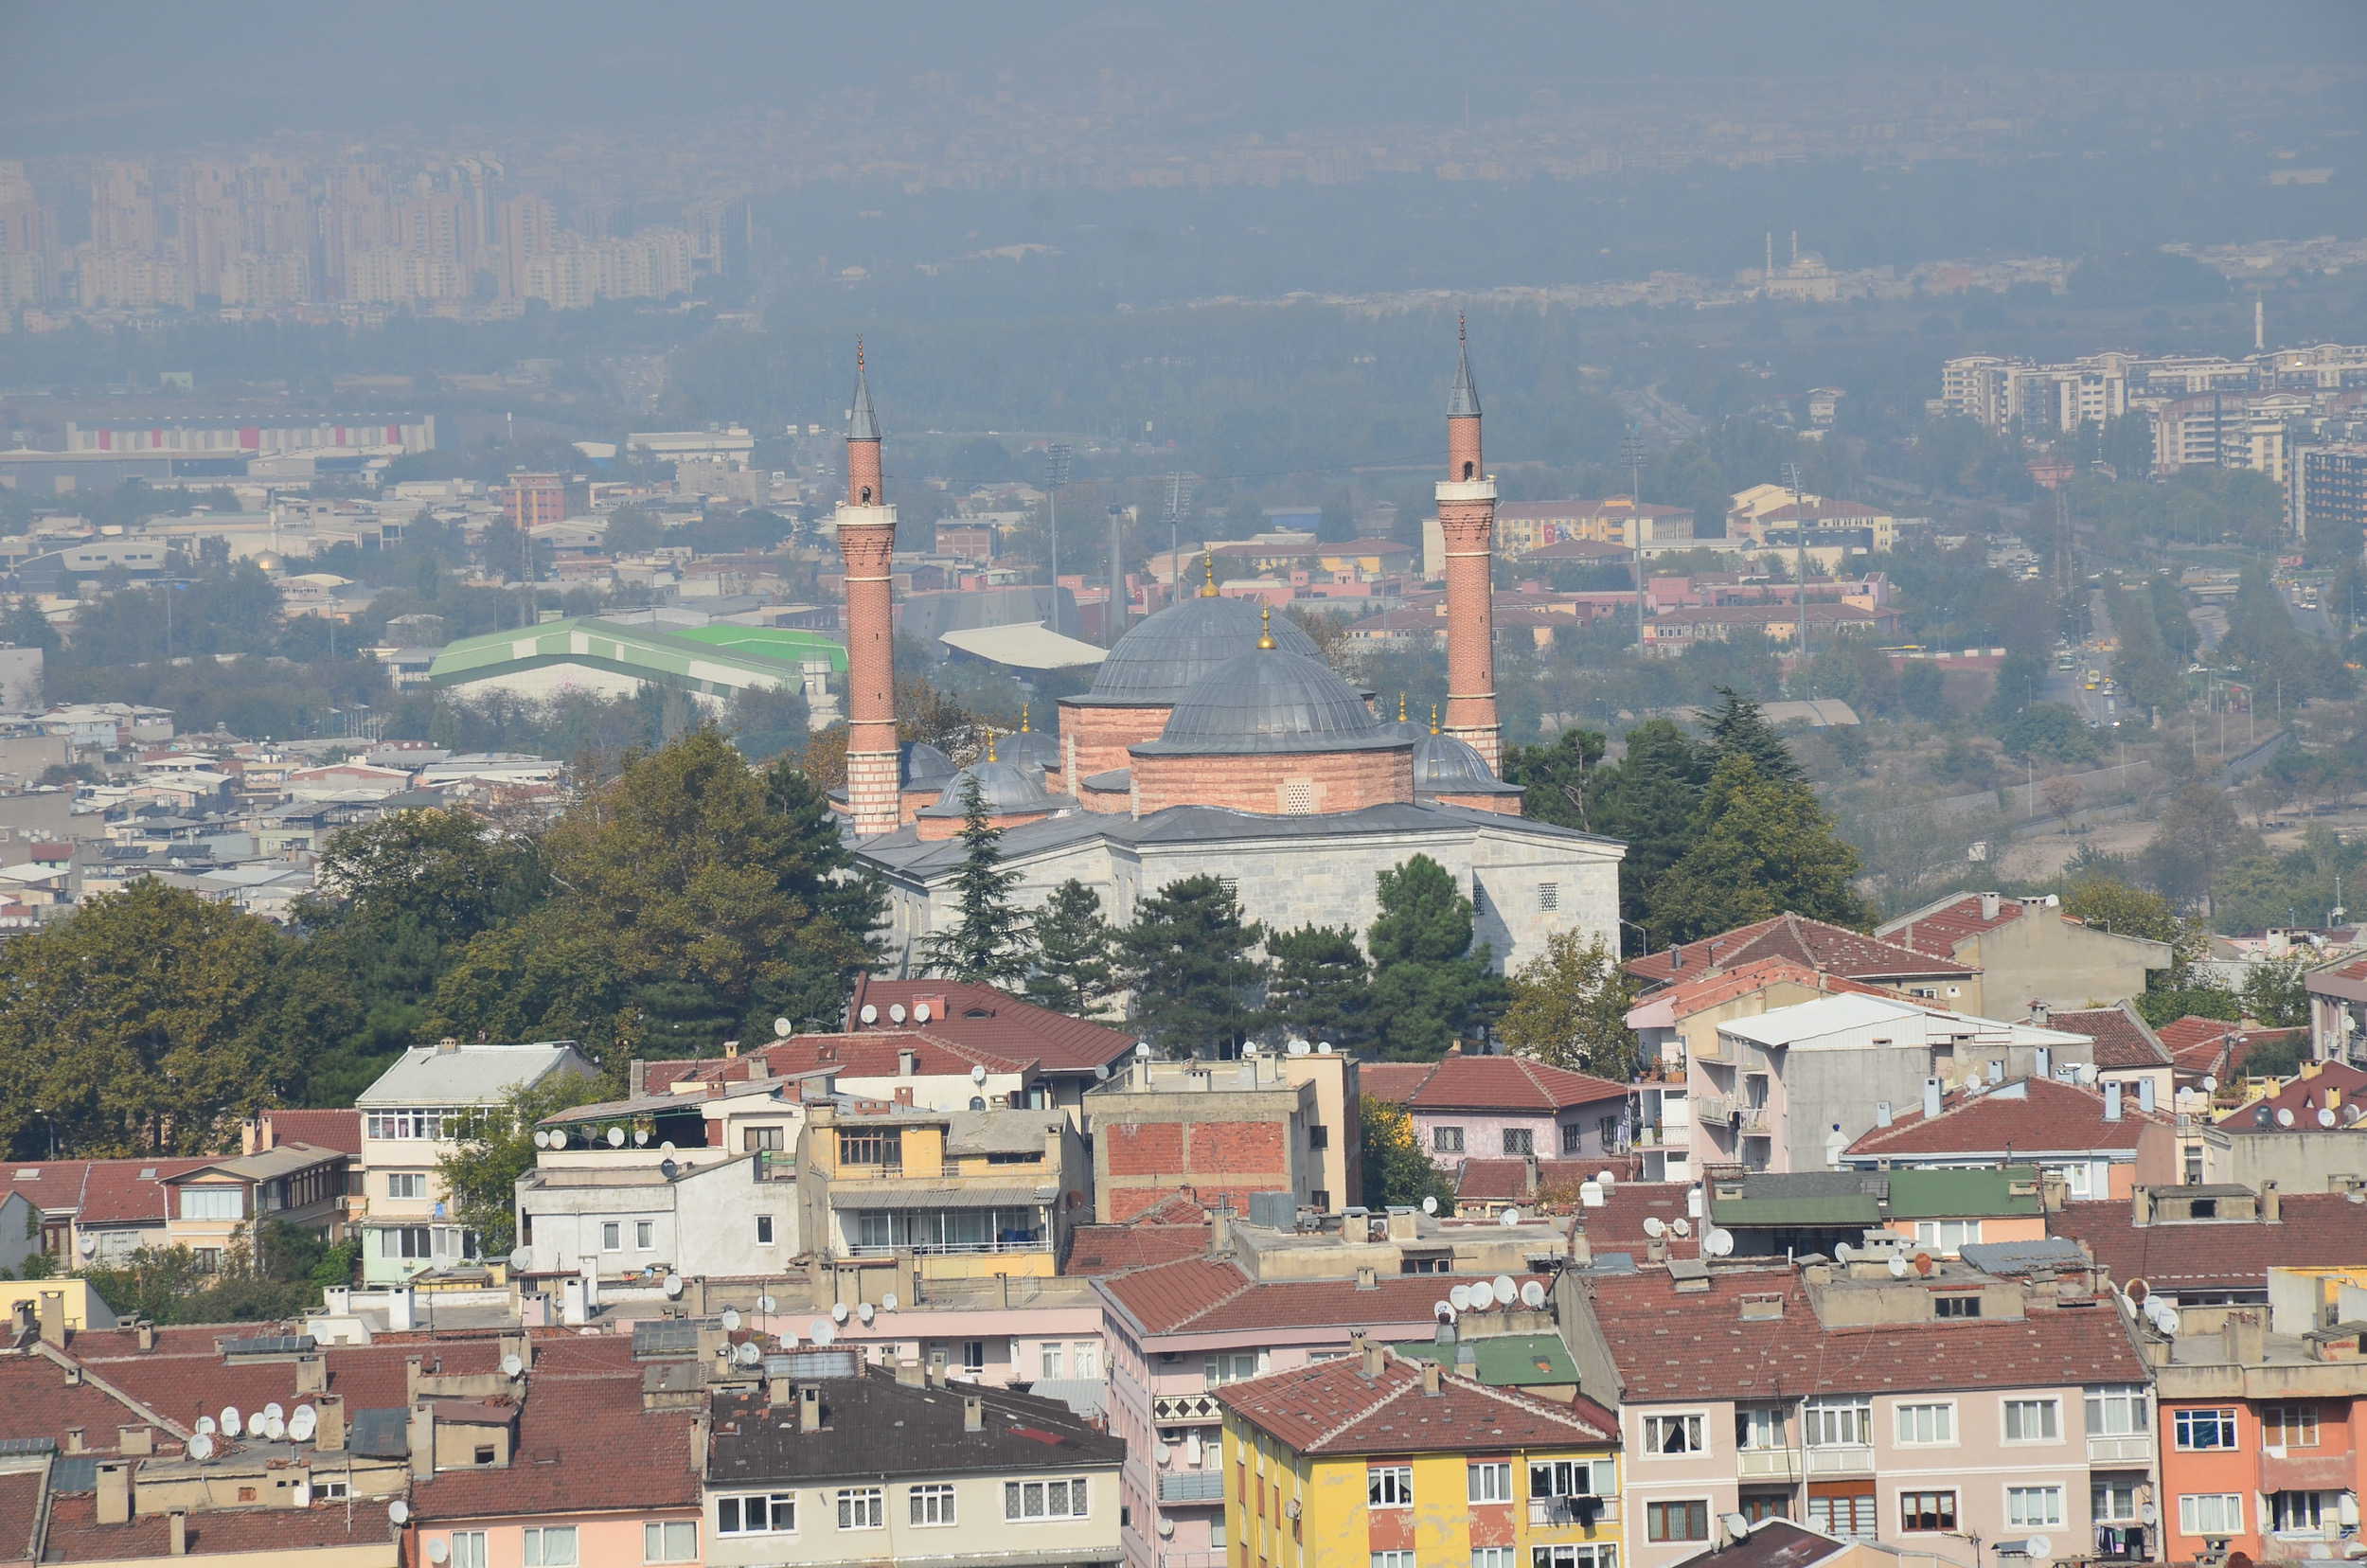 Looking towards the Bayezid I Mosque from the Emir Sultan Mosque in Bursa, Turkey